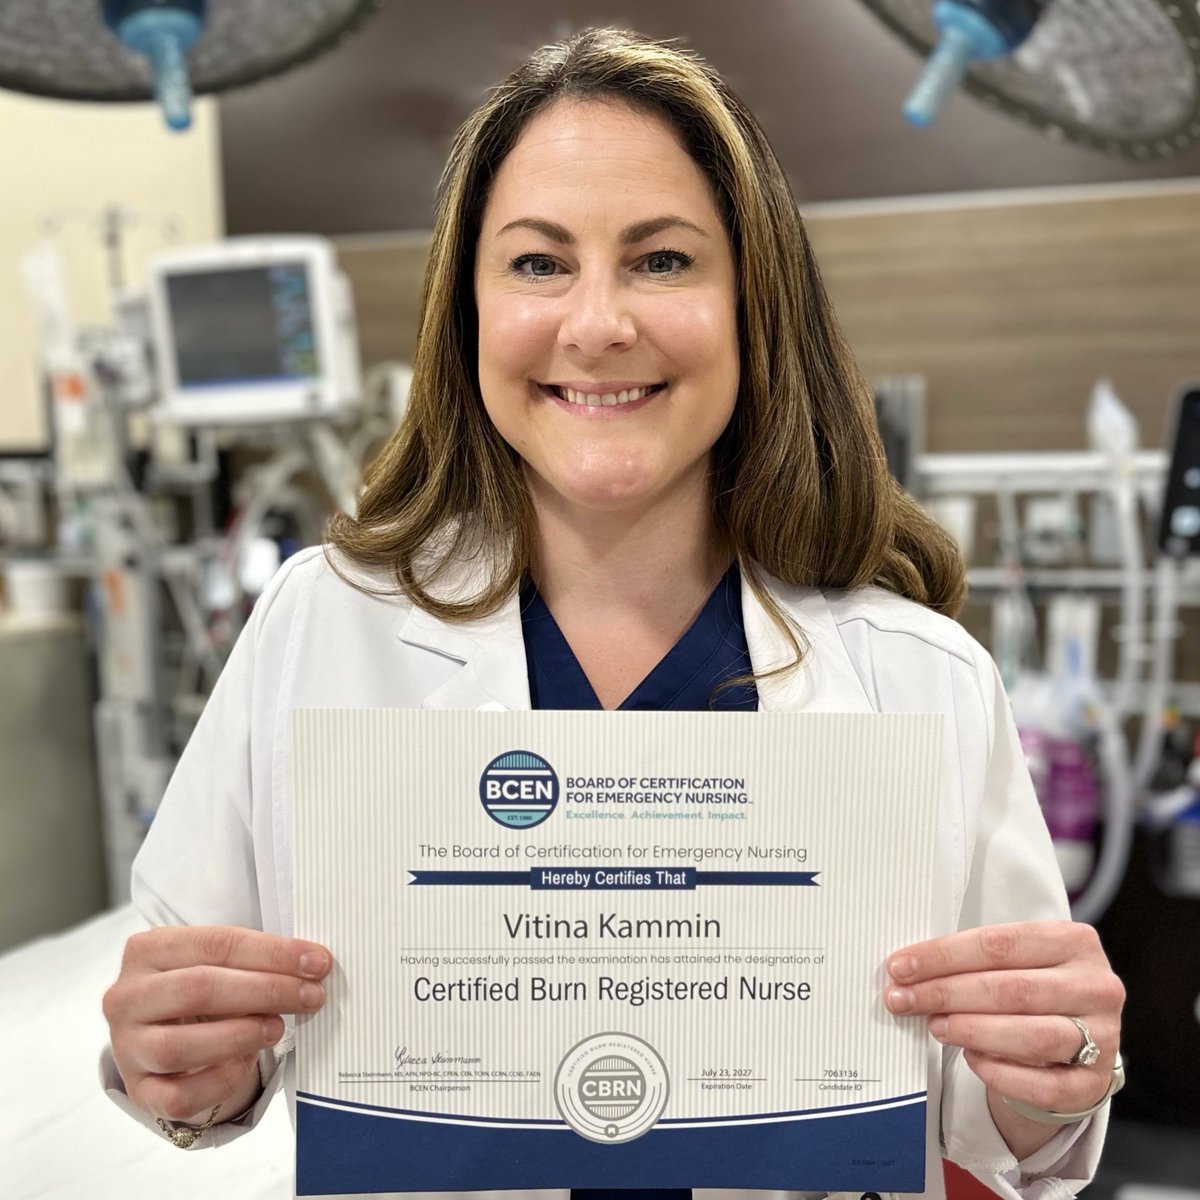 On #CertifiedNursesDay, we thank nurses across HCA Healthcare who have committed to a lifetime of learning, advancing clinical skills and practice. Learn about @HCAFLHealthcare's Vitina Kammin and her dedication to excellence in burn care: bit.ly/48Xh9Rj.